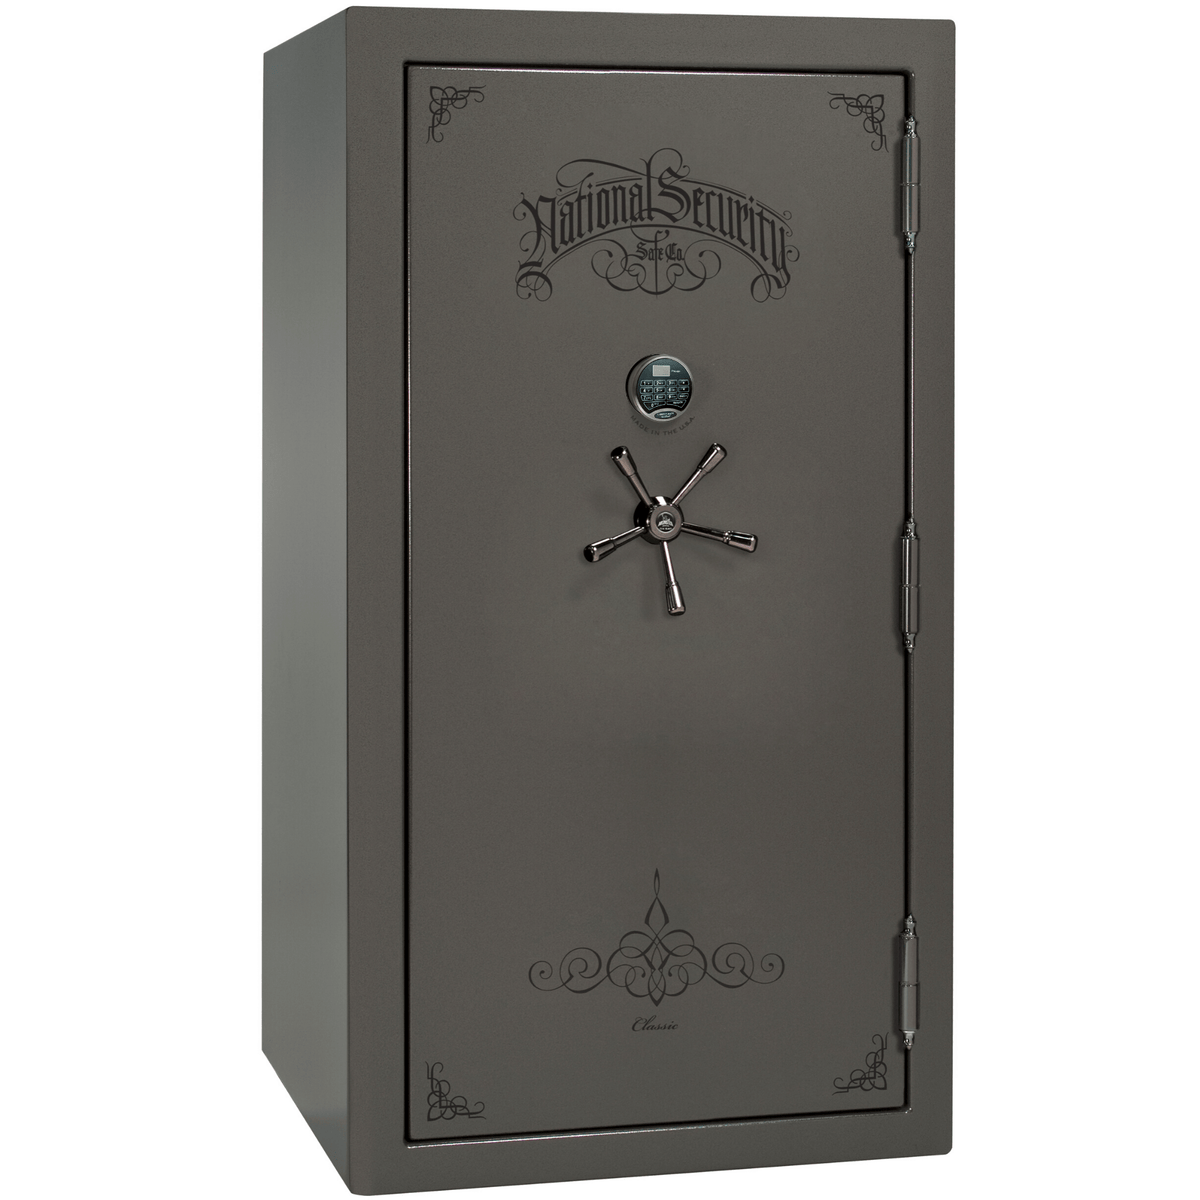 Liberty Safe Classic Plus 40 in Gray Marble with Black Chrome Electronic Lock, closed door.